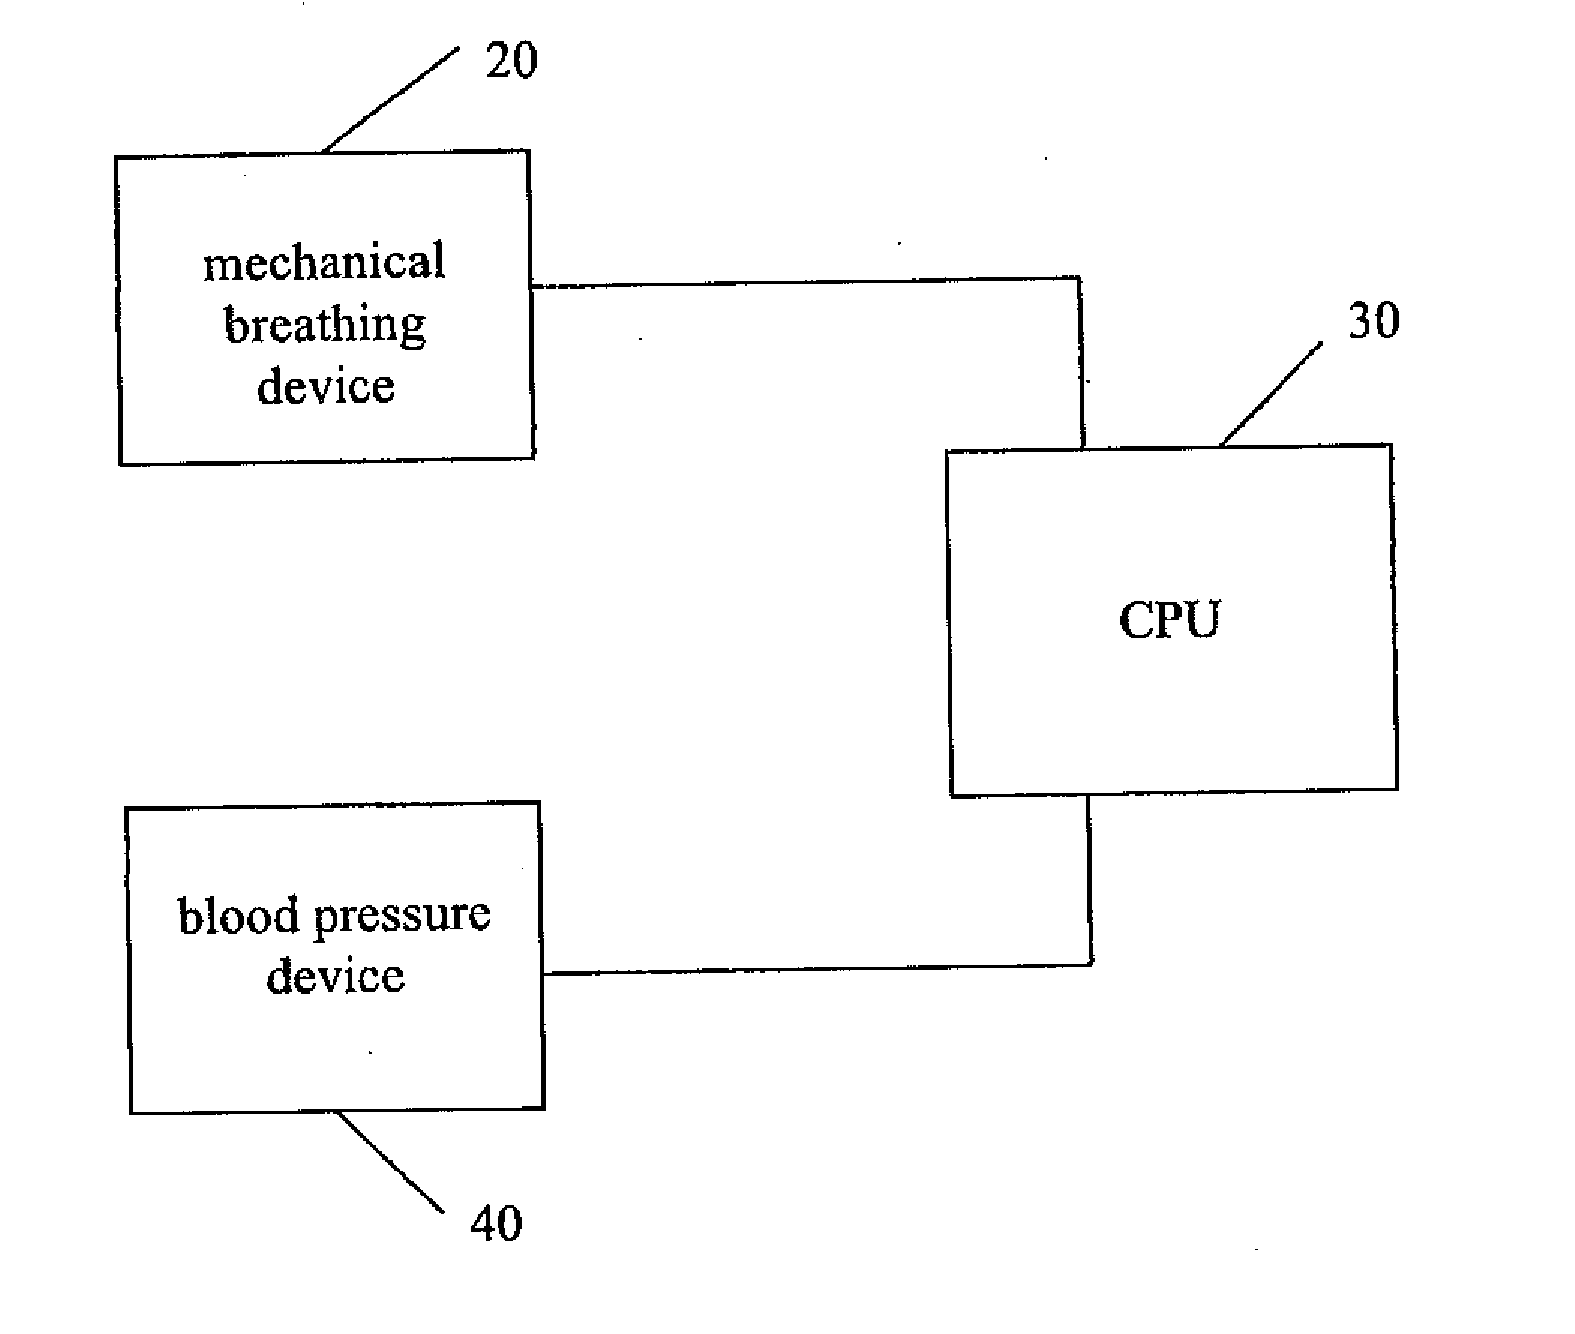 Apparatus and computer program for determining a patient's volemic status represented by cardiopulmonary blood volume